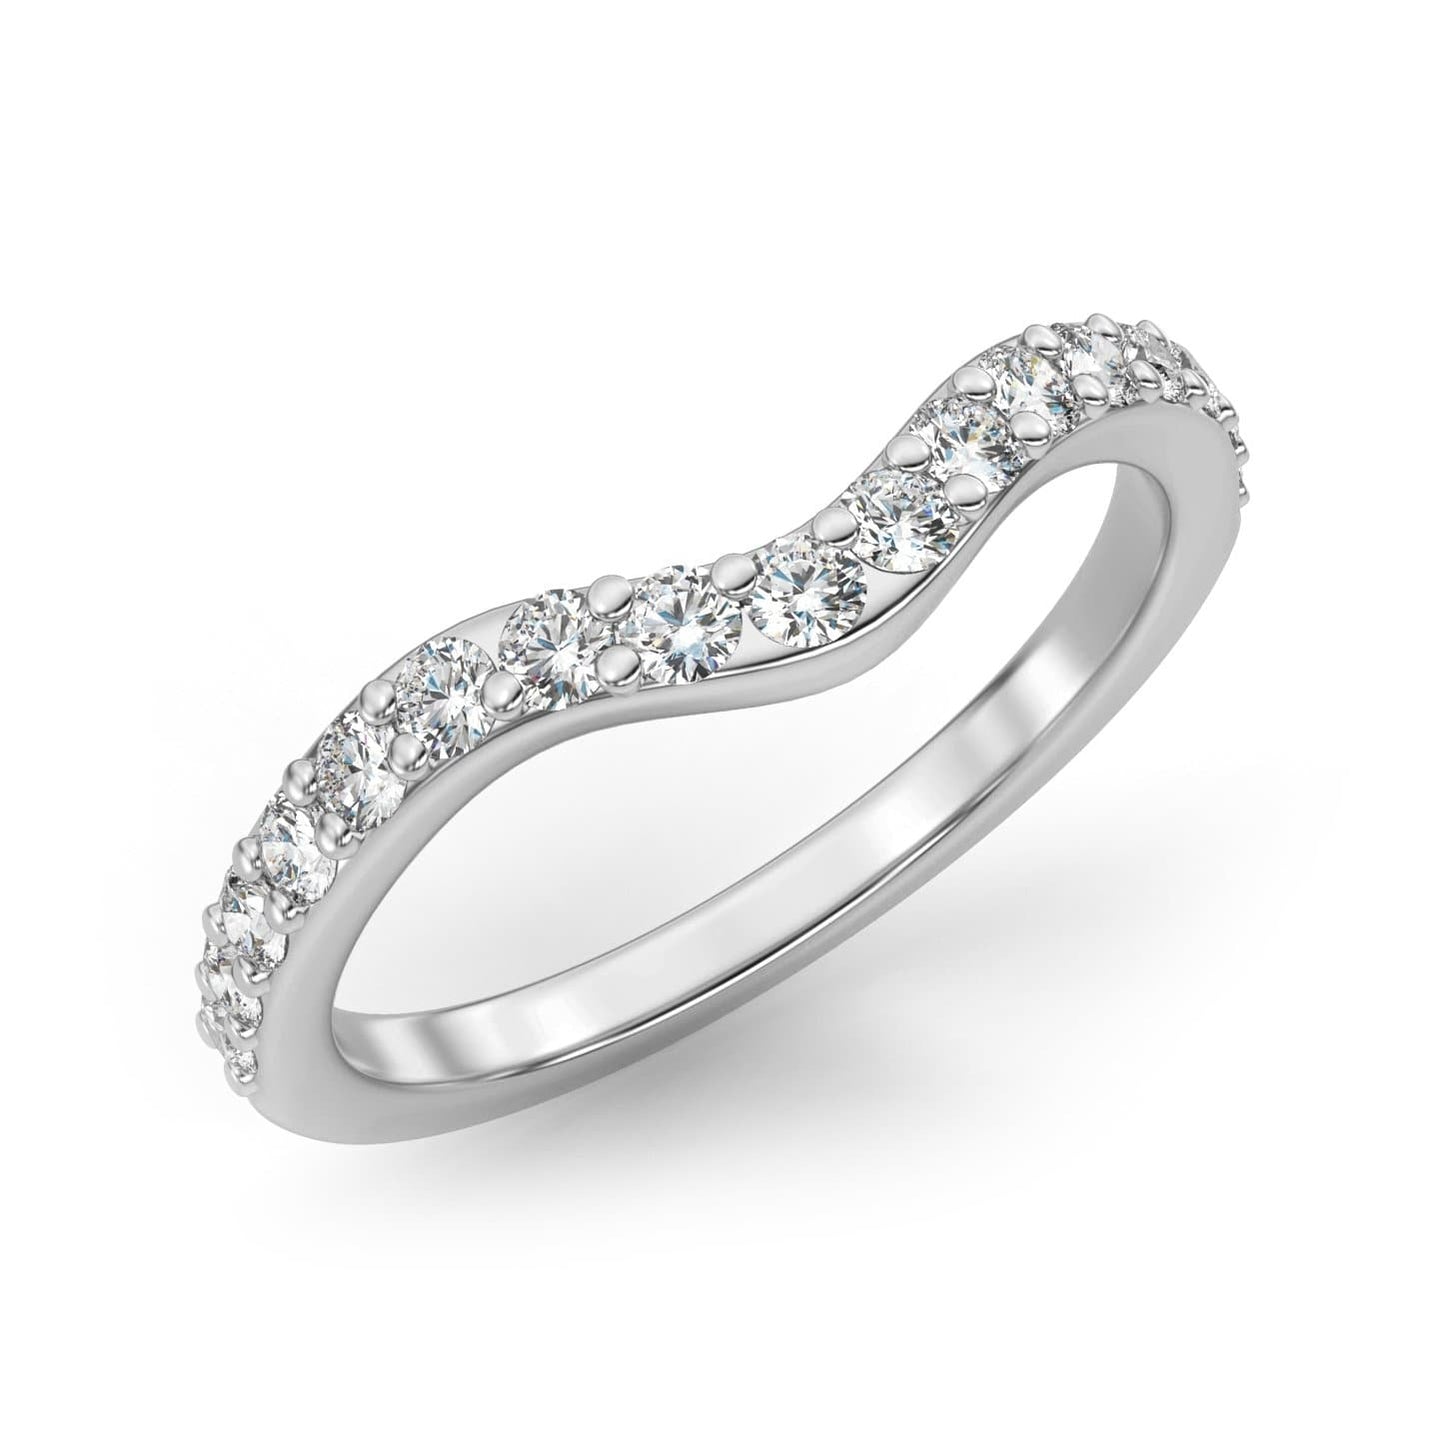 Contour Curved Semi-Eternity Ring in 14k Gold